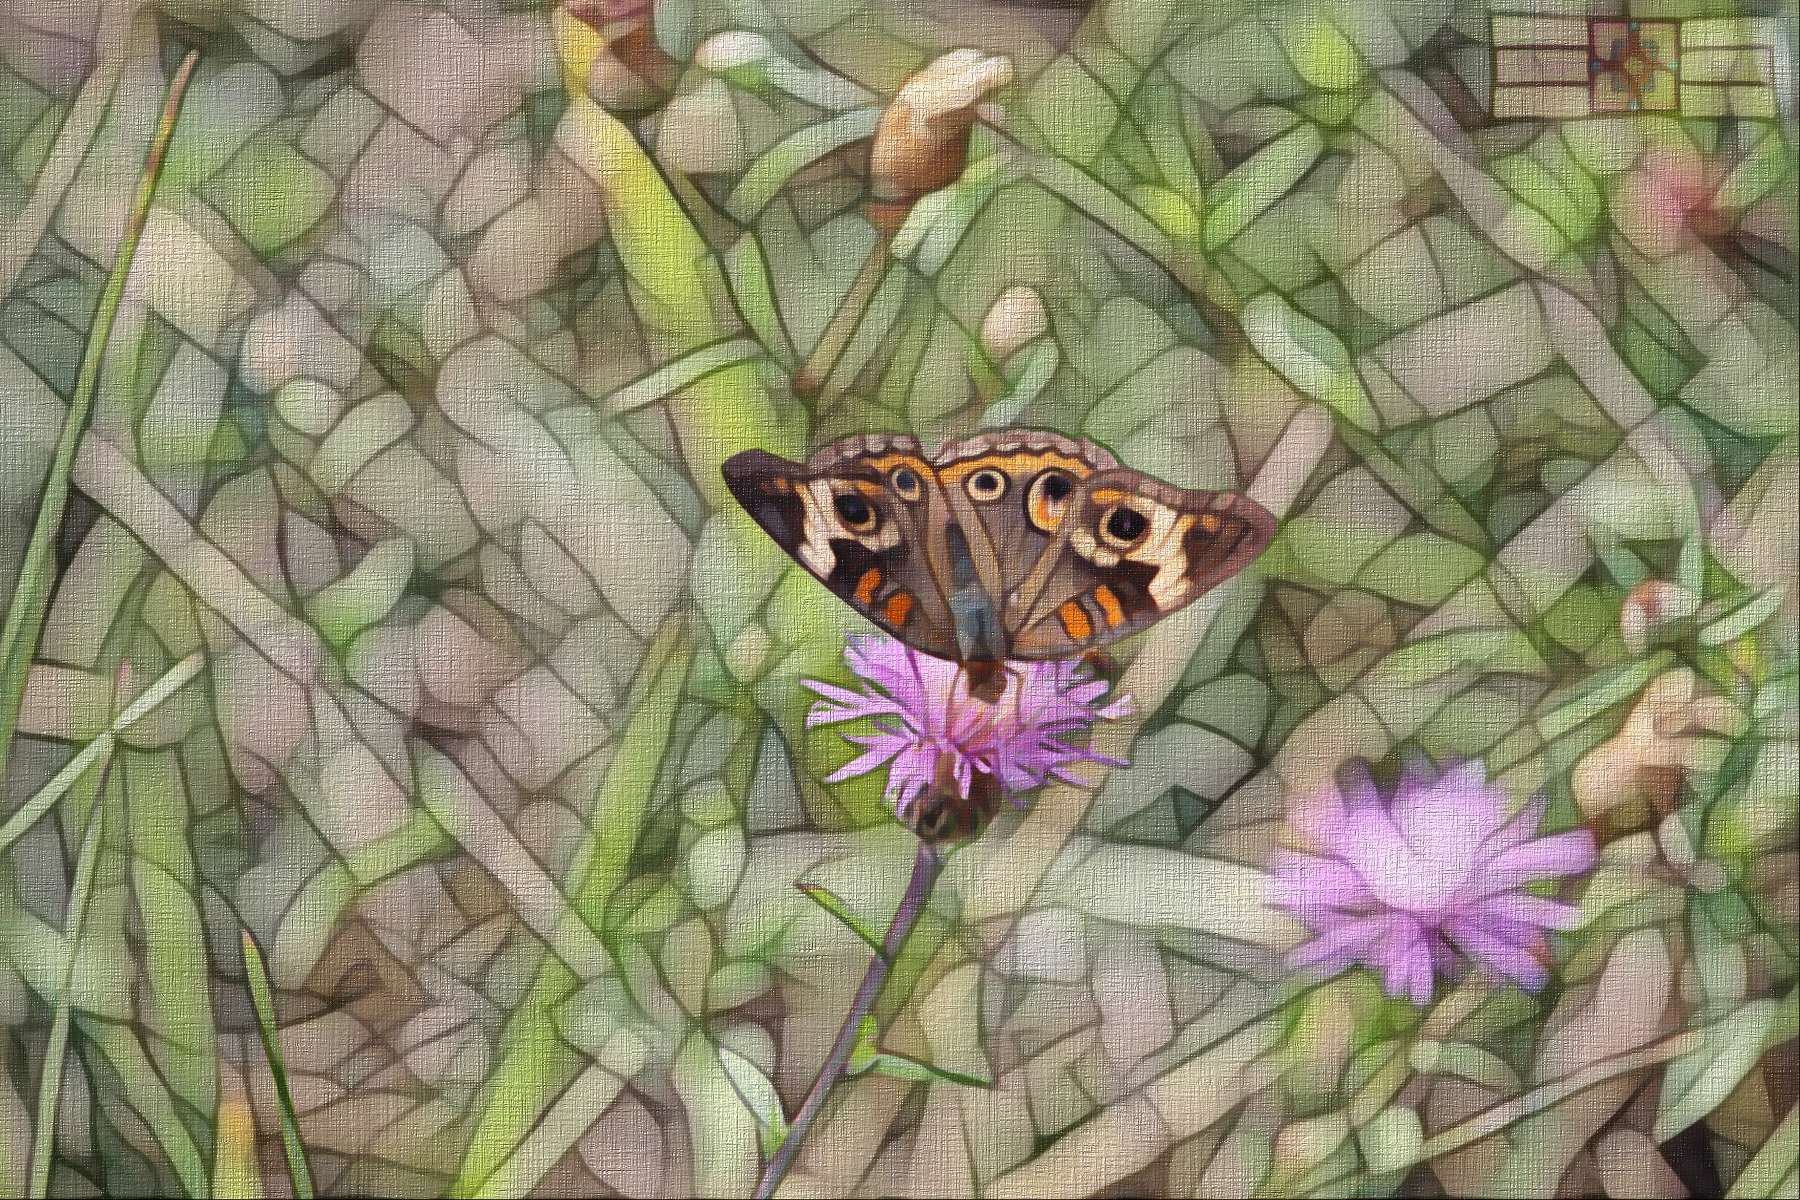 Rosie Crafts Abstract Digital Butterfly Artwork